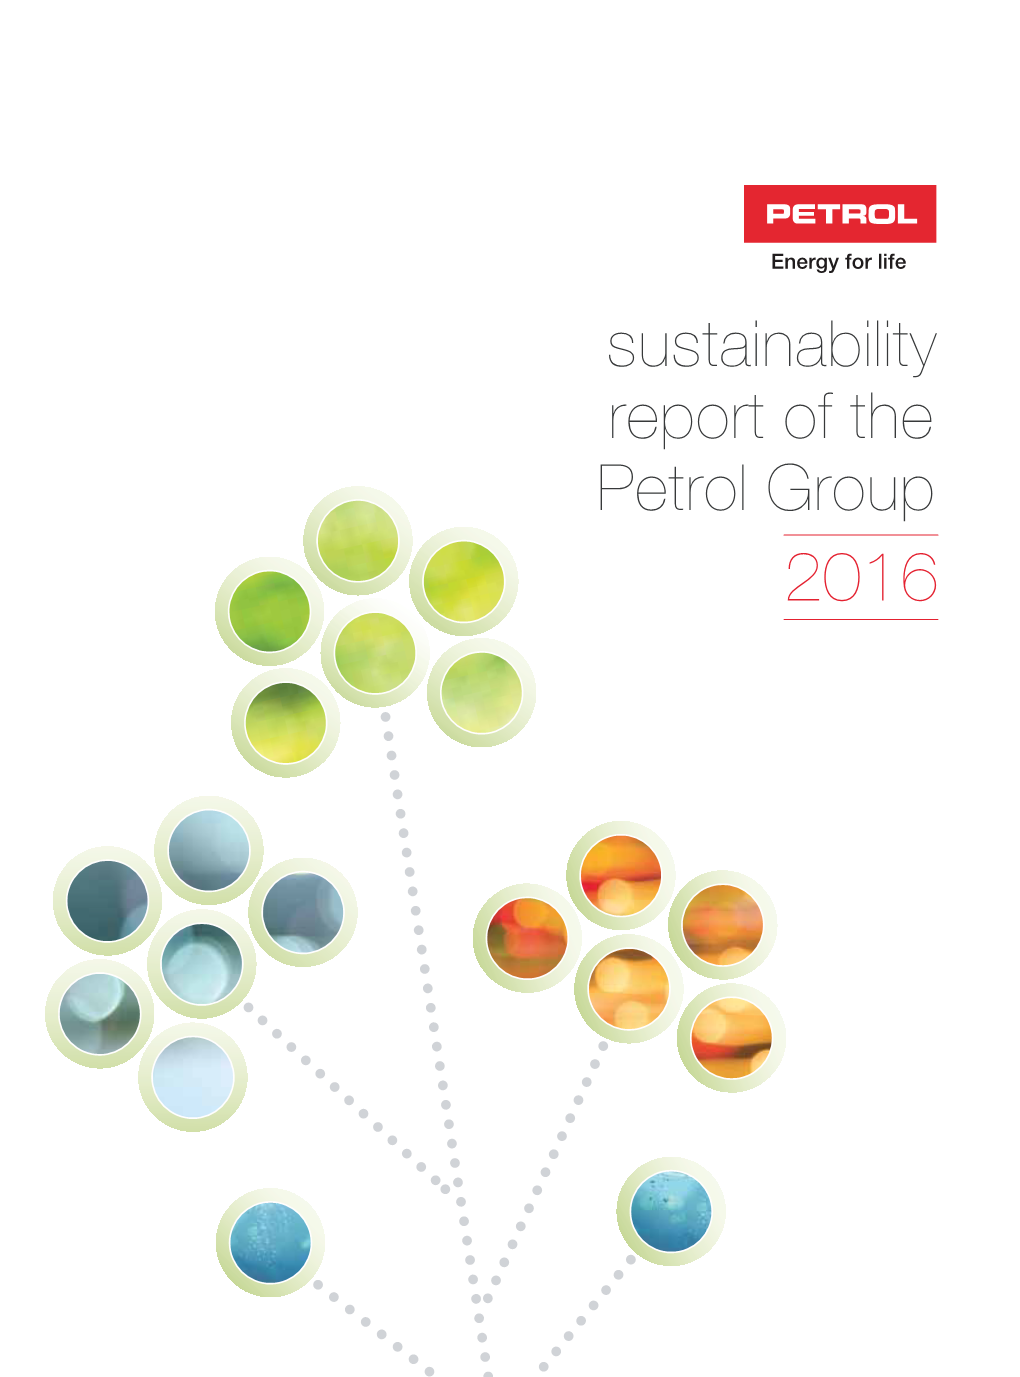 Sustainability Report of the Petrol Group